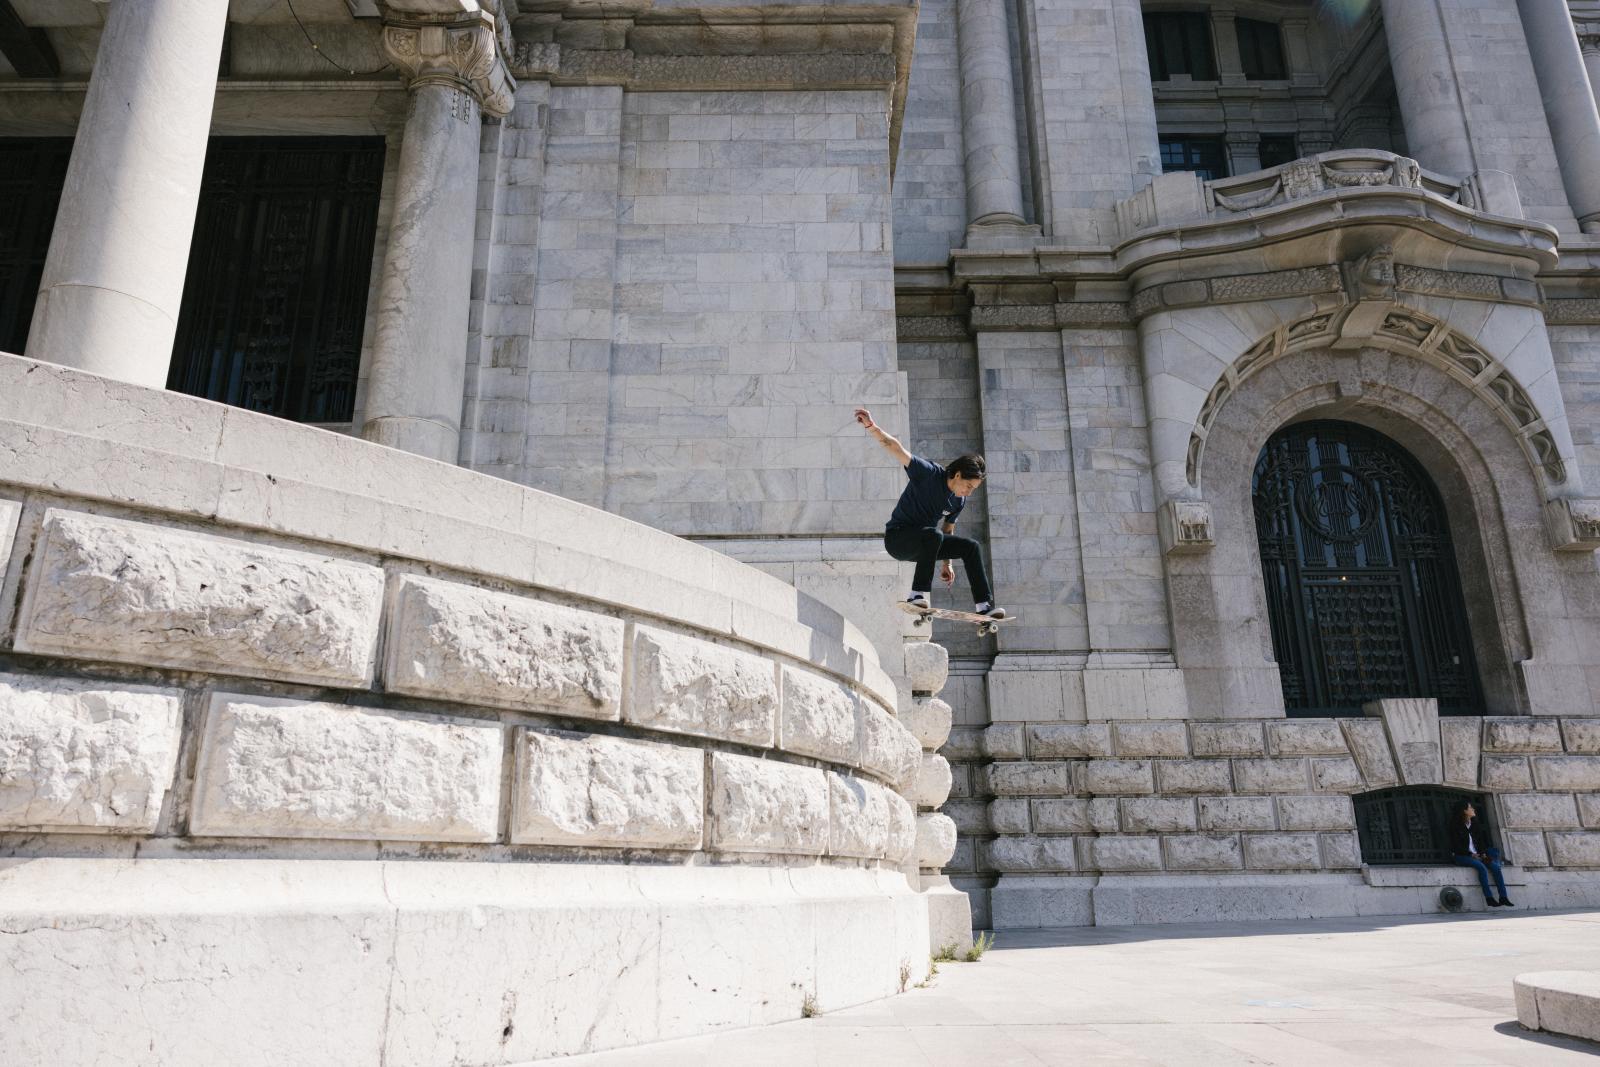 Mexico City, Mexico. January 9, 2021. Oscar Meza, a pro skateboarder and Olympic qualifier, does a trick at the Palacio de Bellas Artes in Mexico City, Mexico. CREDIT: Alicia Vera for The New York Times 